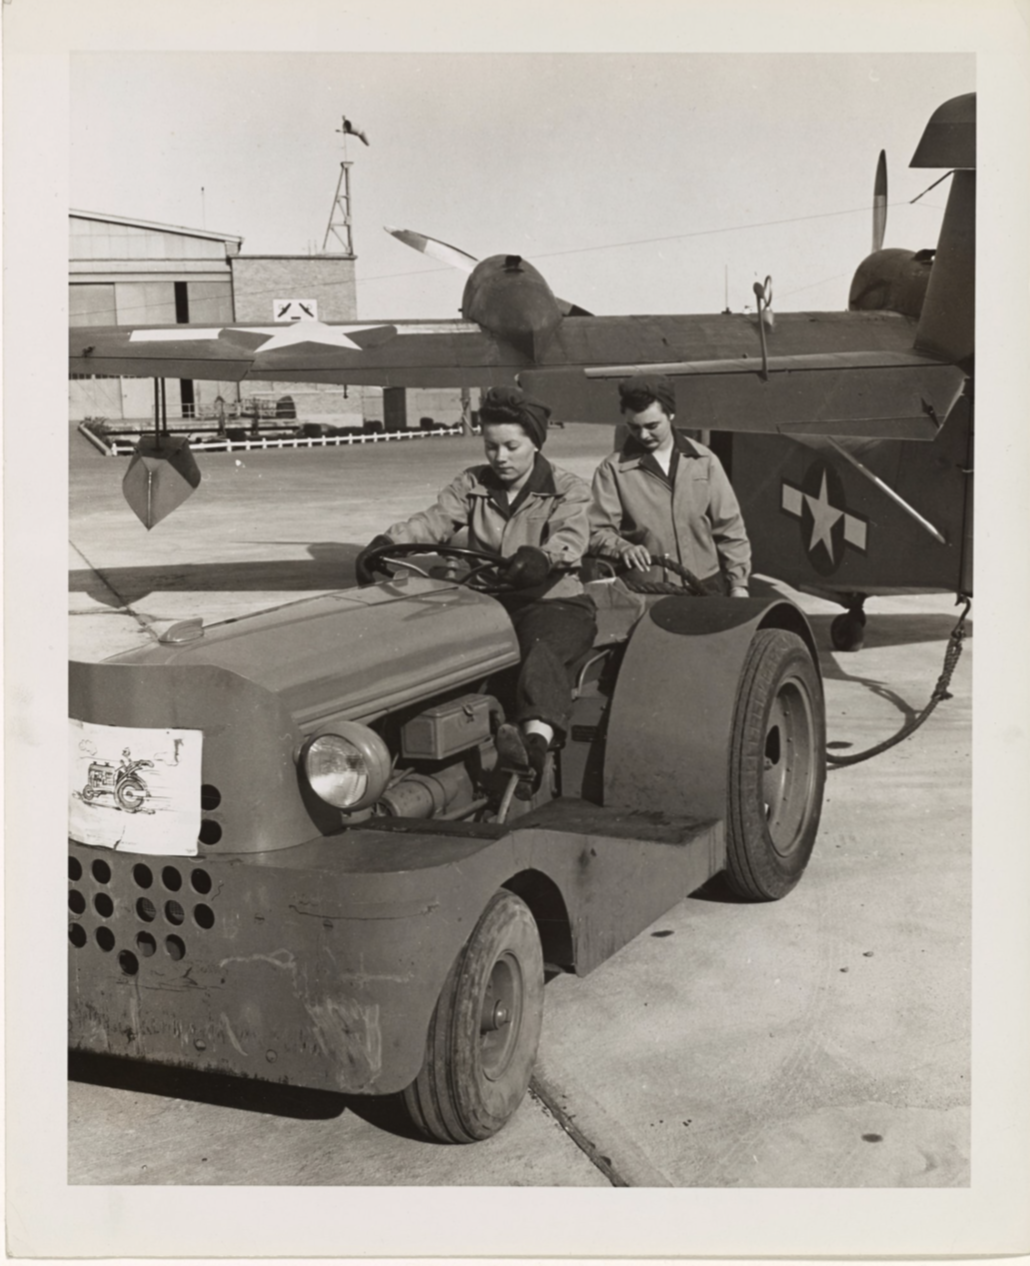 SPAR aviation mechanic Marian Behrends preparing to tow a Coast Guard amphibian aircraft back to the hangar. (National Archives)